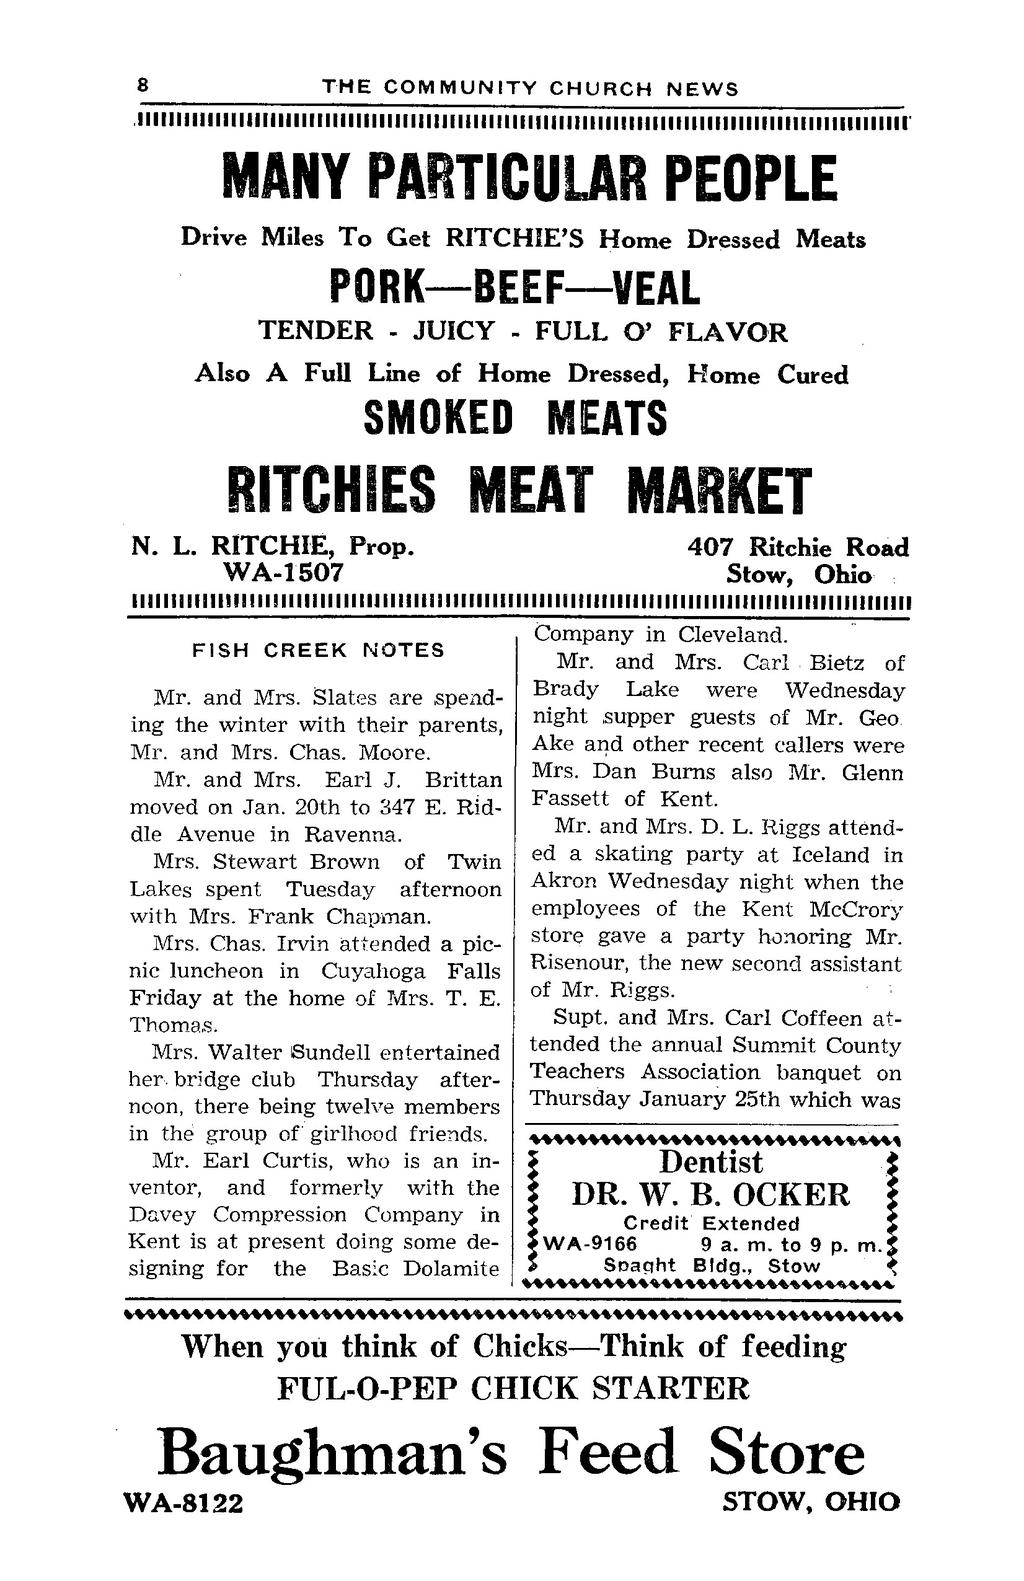 10 THE COMMUNITY CHURCH NEWS MANYPARTICULAR PEOPLE Drive Miles To Get RITCHIE'S Home Dressed Meats PORK BEEF VEAL TENDER - JUICY - FULL O' FLAVOR Also A Full Line of Home Dressed, Home Cured SMOKED